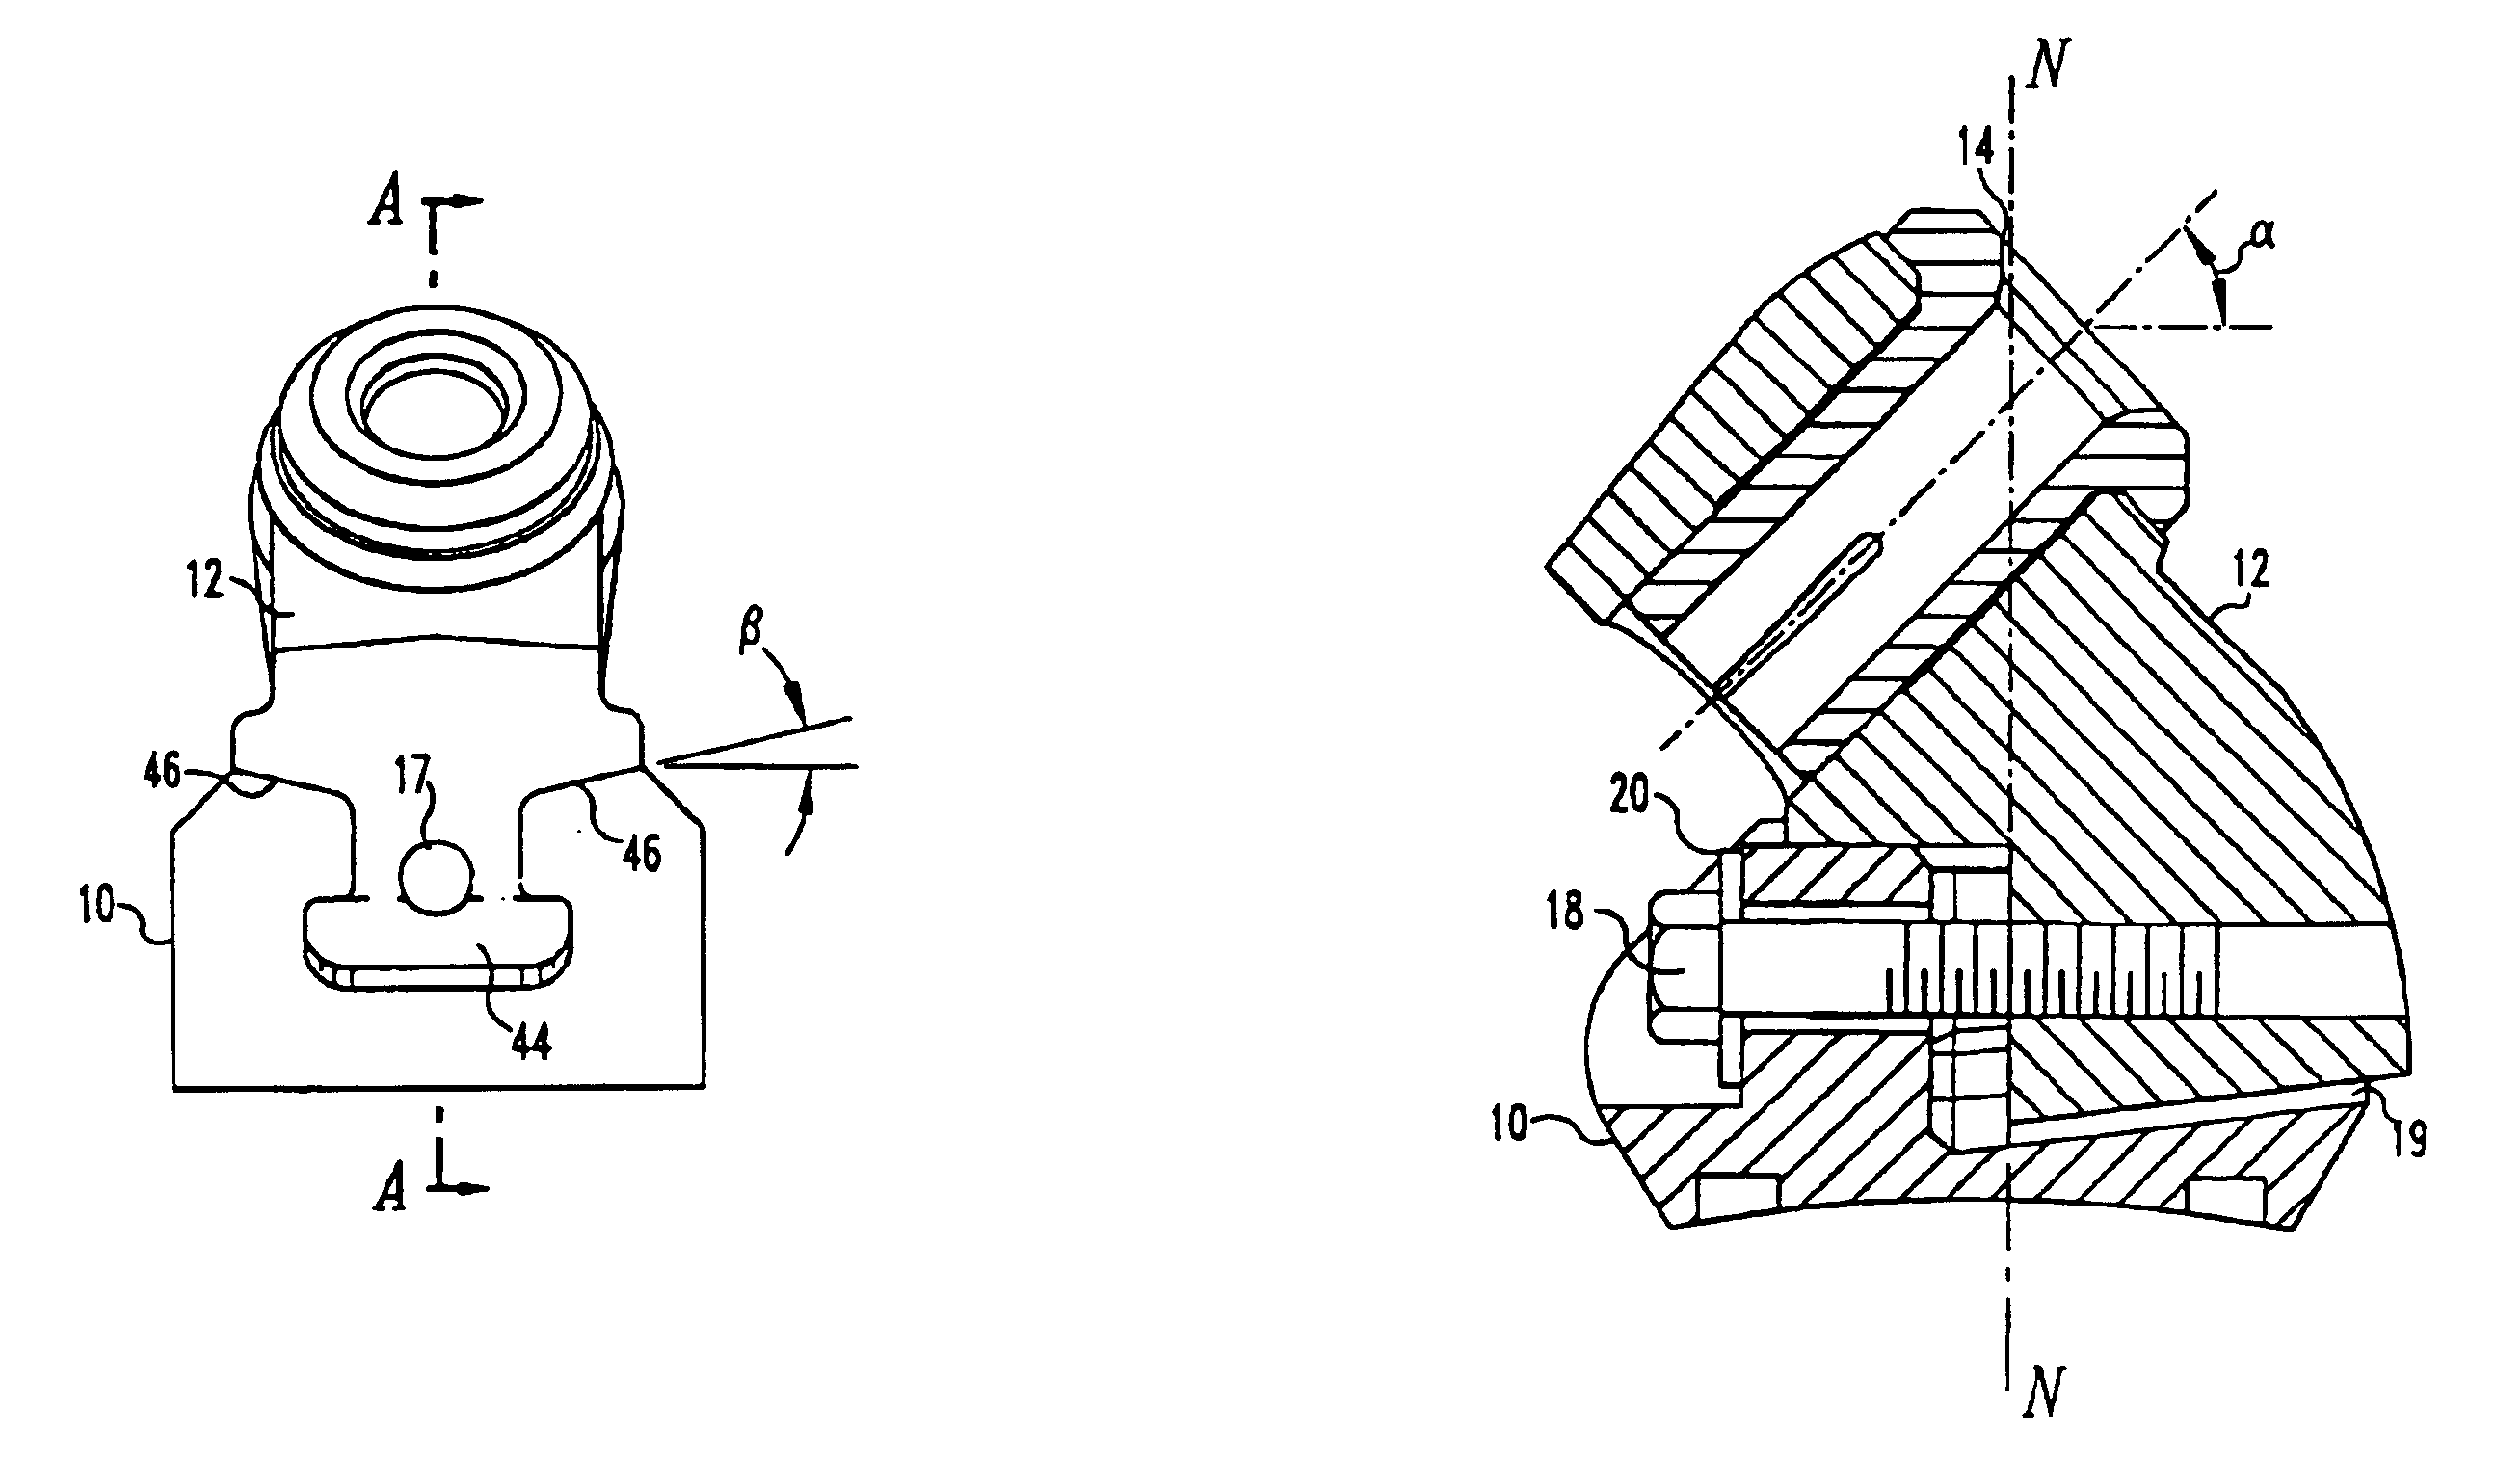 T-shaped cutter tool assembly with wear sleeve